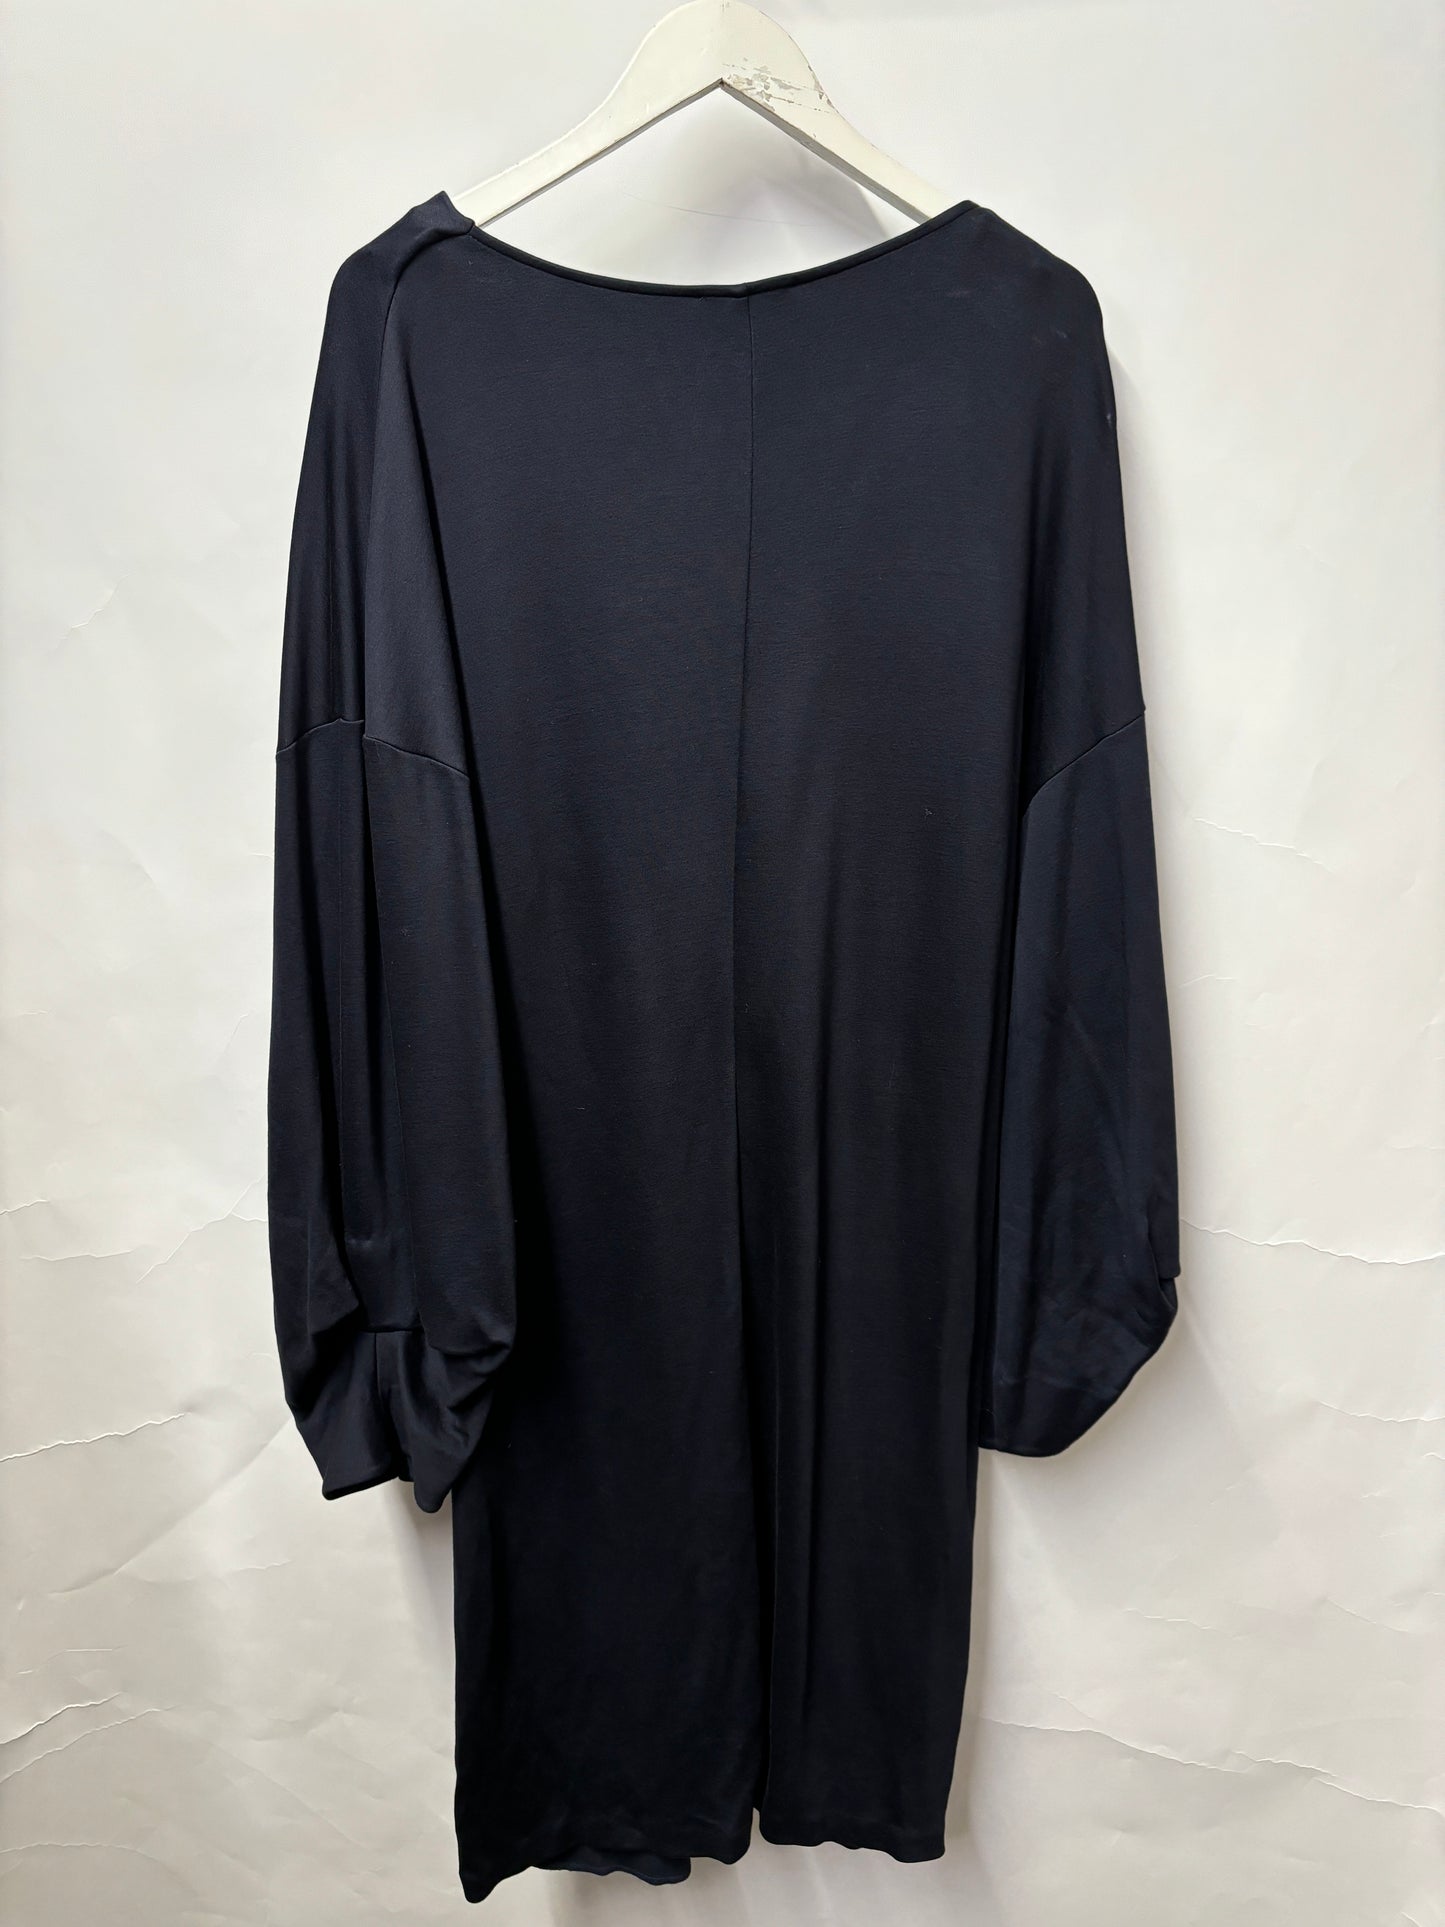 COS Navy Blue Long Sleeved Thick Smart Dress Large